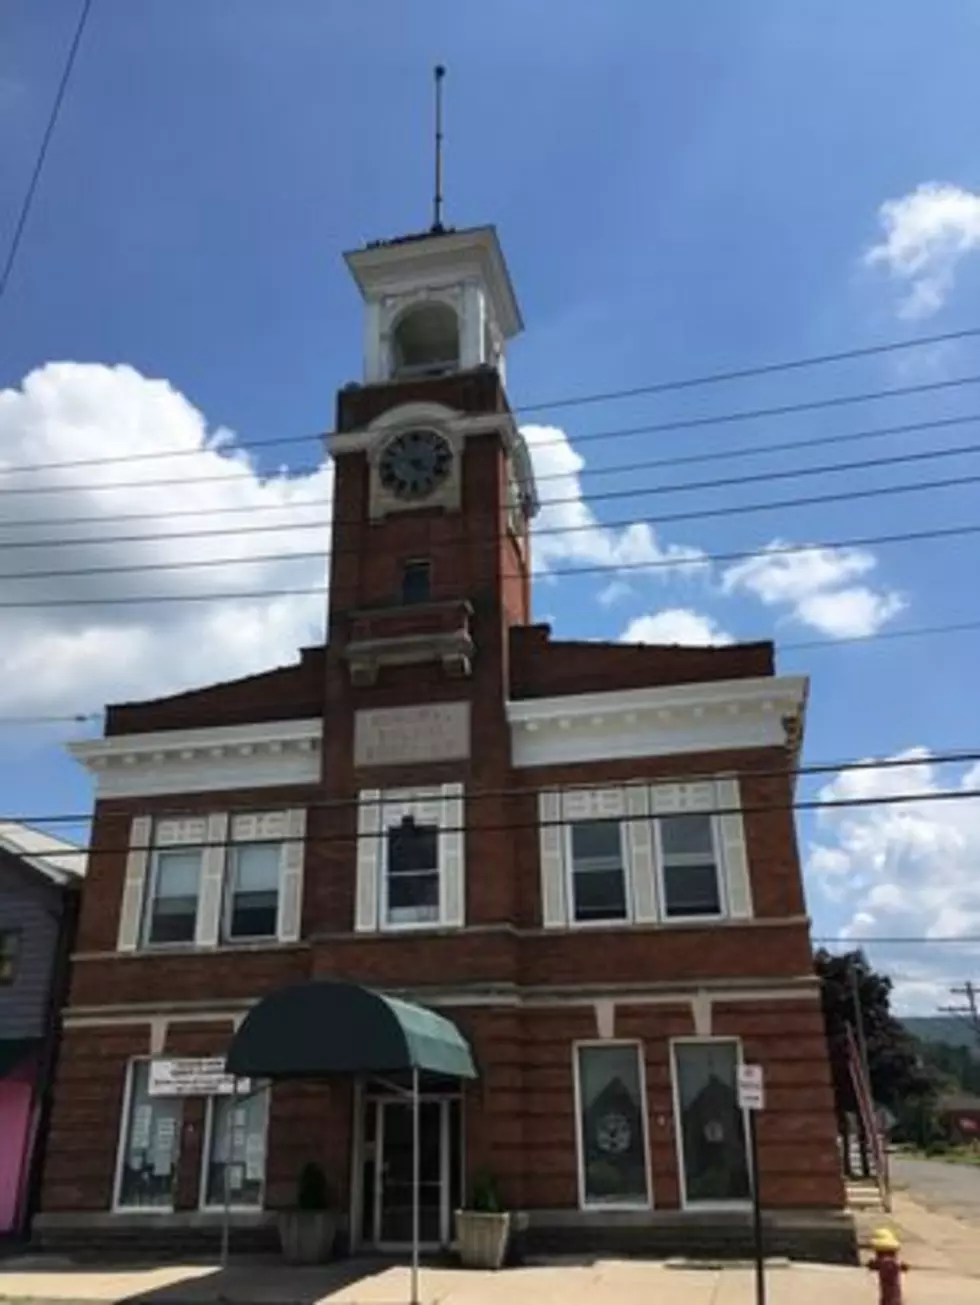 Big Chuck’s “Property Pick of the Week”–  Sidney’s Historic Clock Tower!